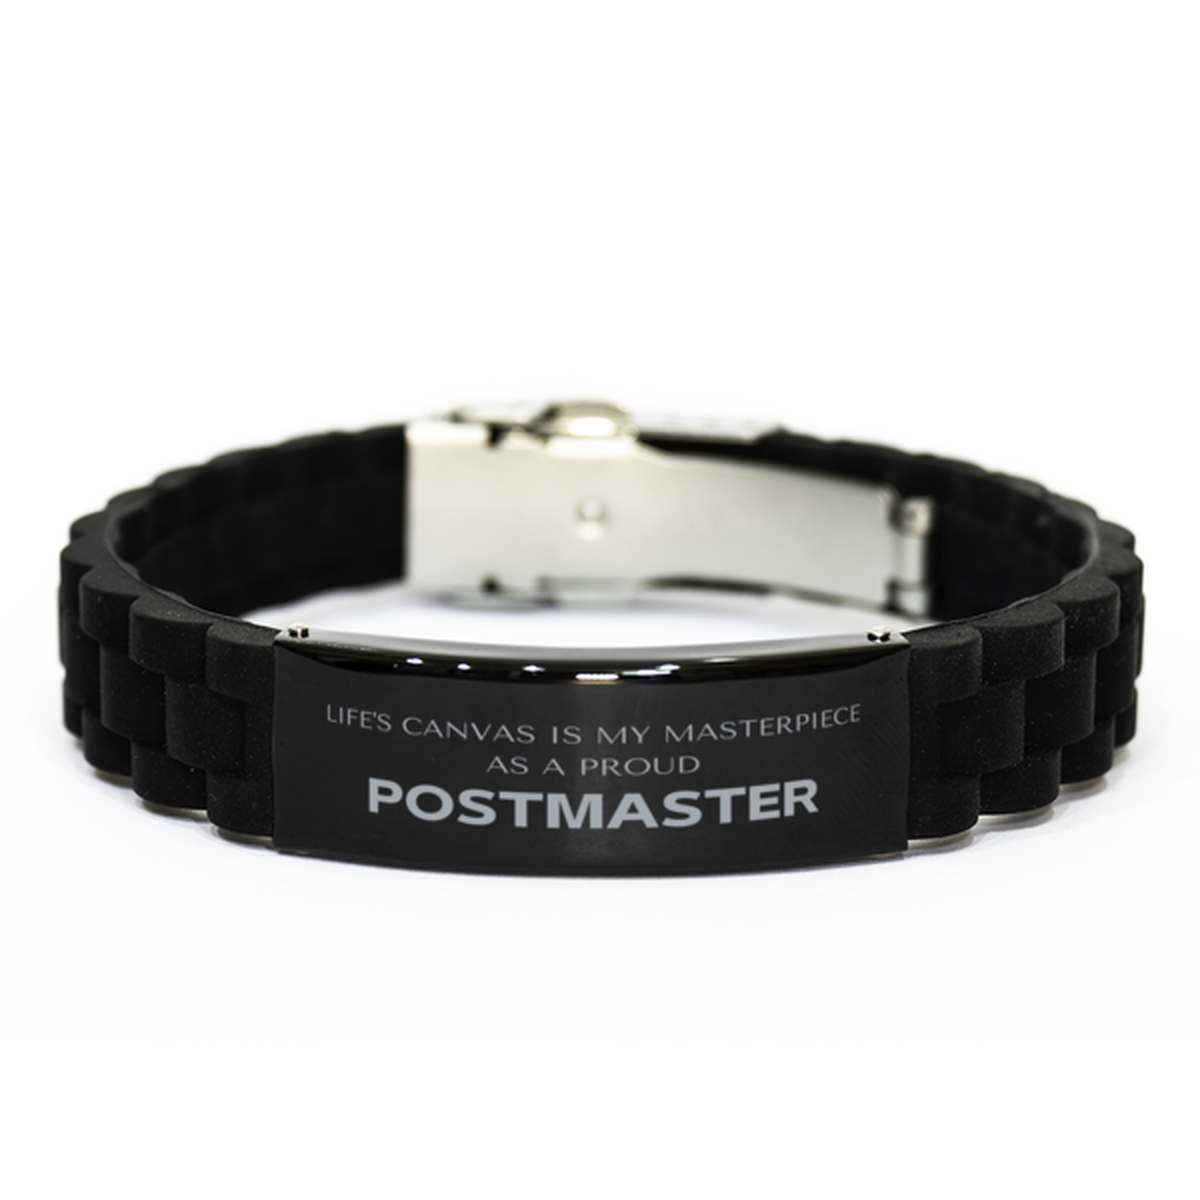 Proud Postmaster Gifts, Life's canvas is my masterpiece, Epic Birthday Christmas Unique Black Glidelock Clasp Bracelet For Postmaster, Coworkers, Men, Women, Friends